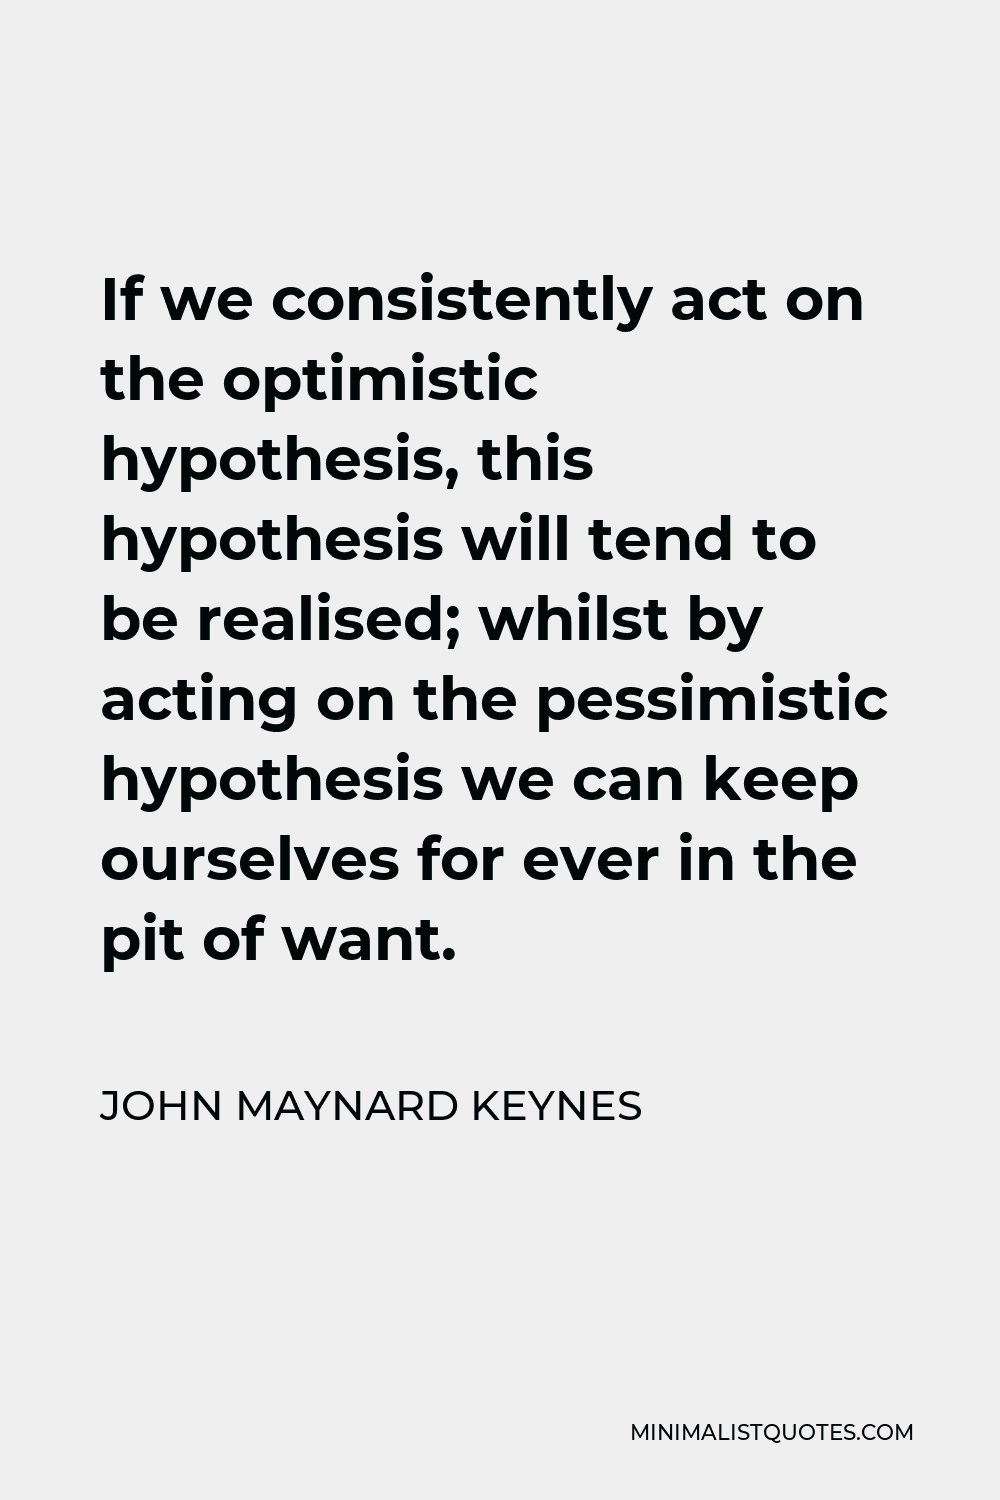 John Maynard Keynes Quote - If we consistently act on the optimistic hypothesis, this hypothesis will tend to be realised; whilst by acting on the pessimistic hypothesis we can keep ourselves for ever in the pit of want.